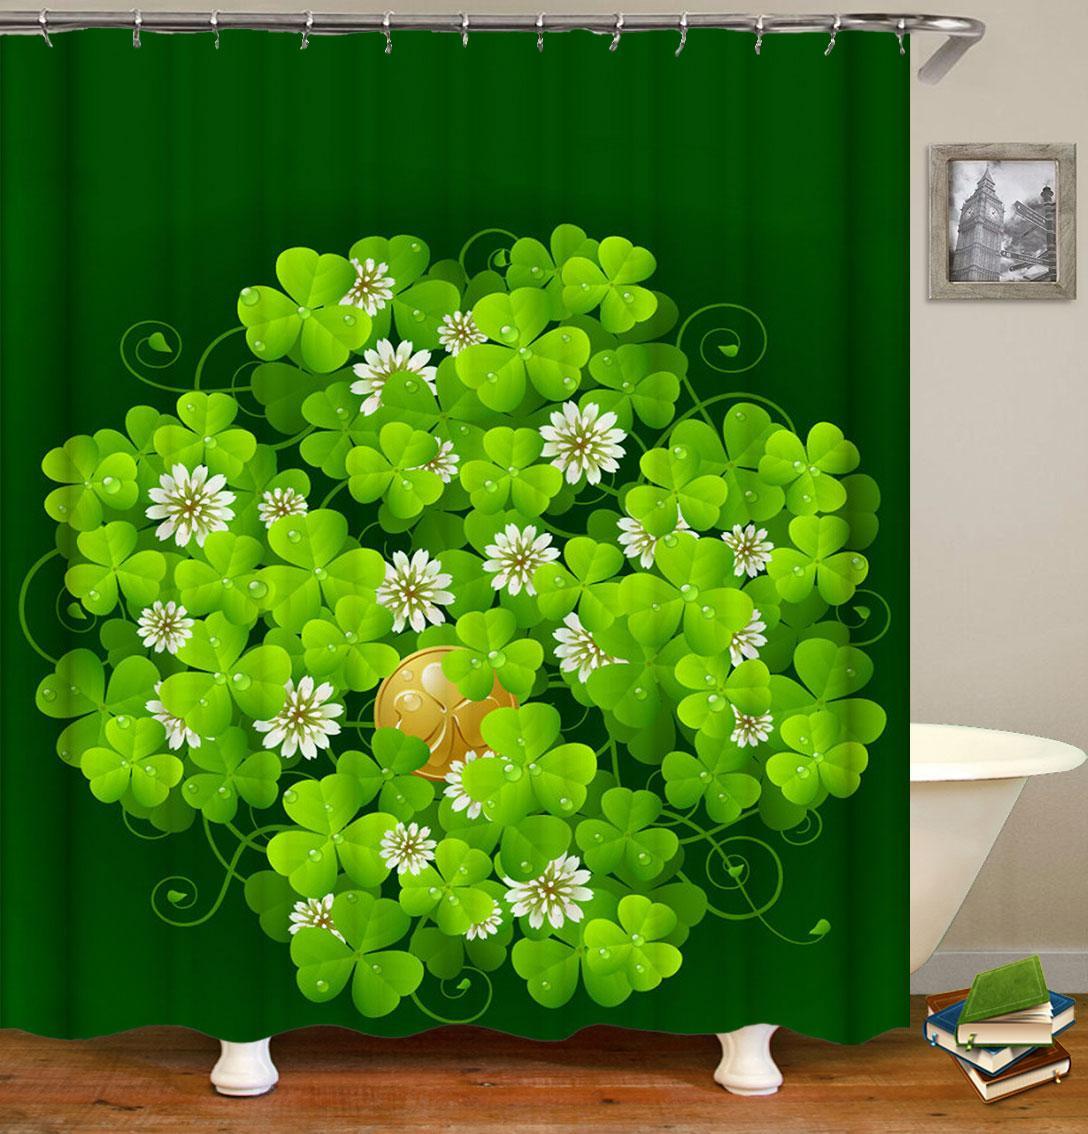 Green Clovers and Clover Flowers Shower Curtain 180cm x 180cm Shower Curtain Only